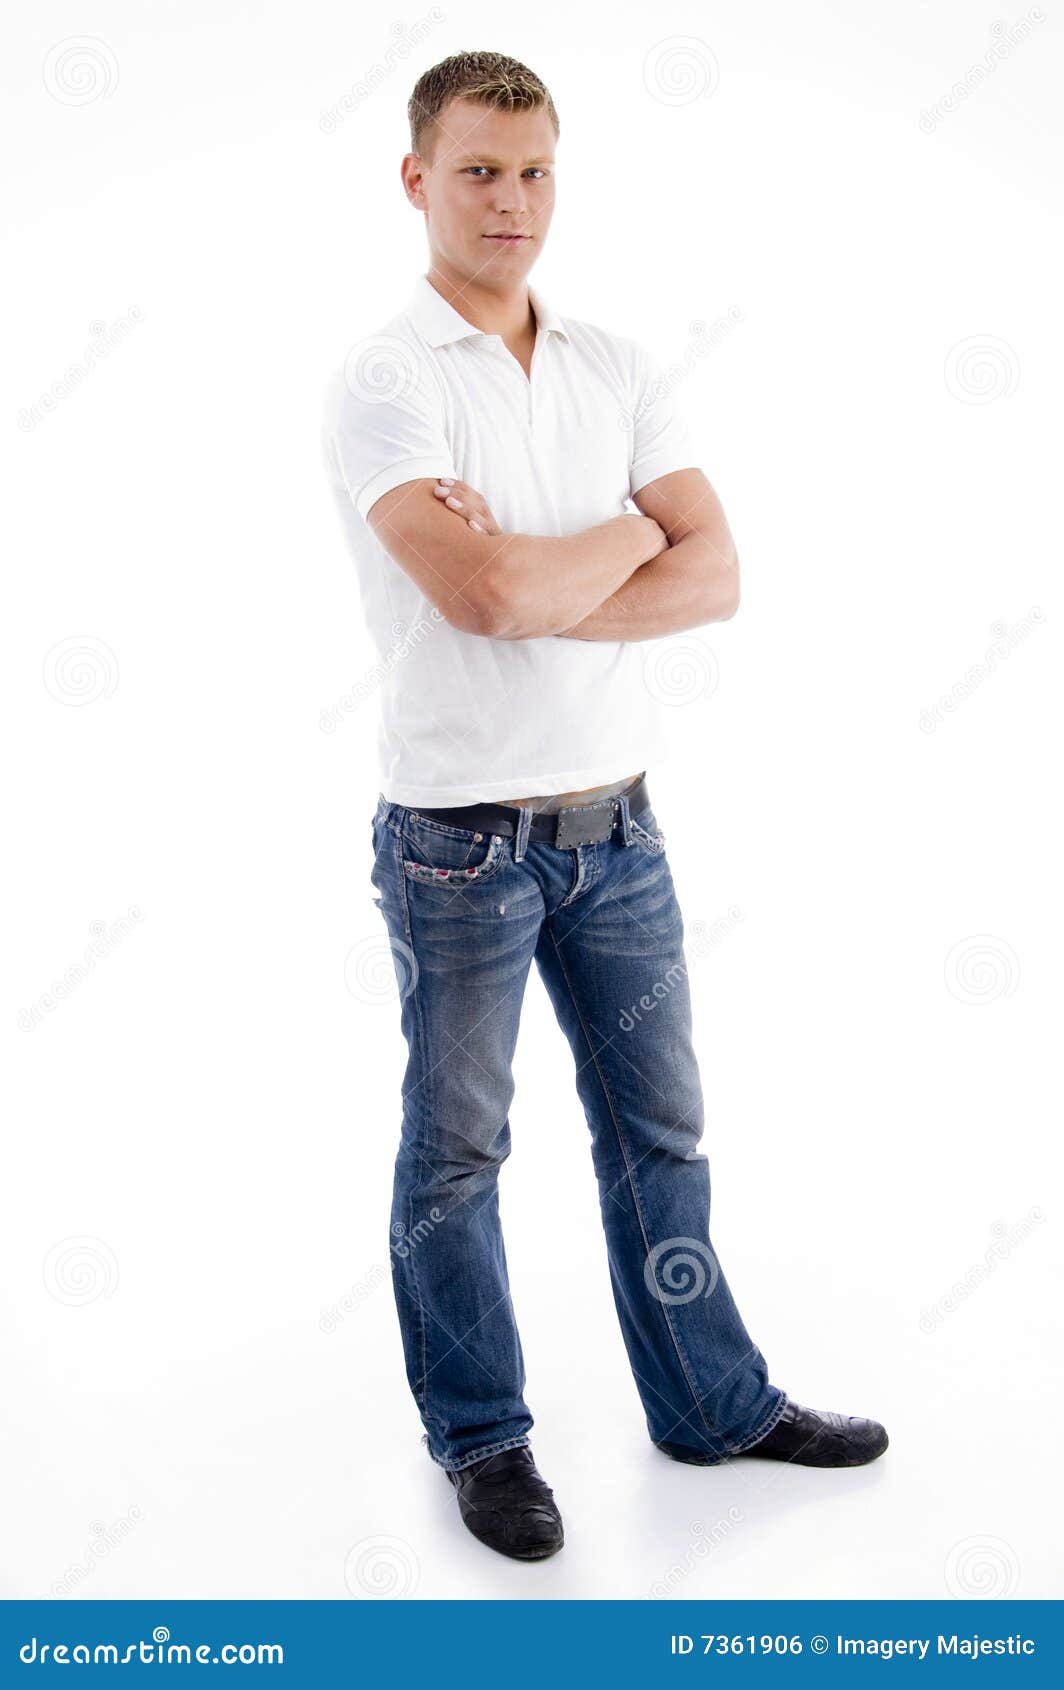 https://thumbs.dreamstime.com/z/male-standing-folded-arms-7361906.jpg